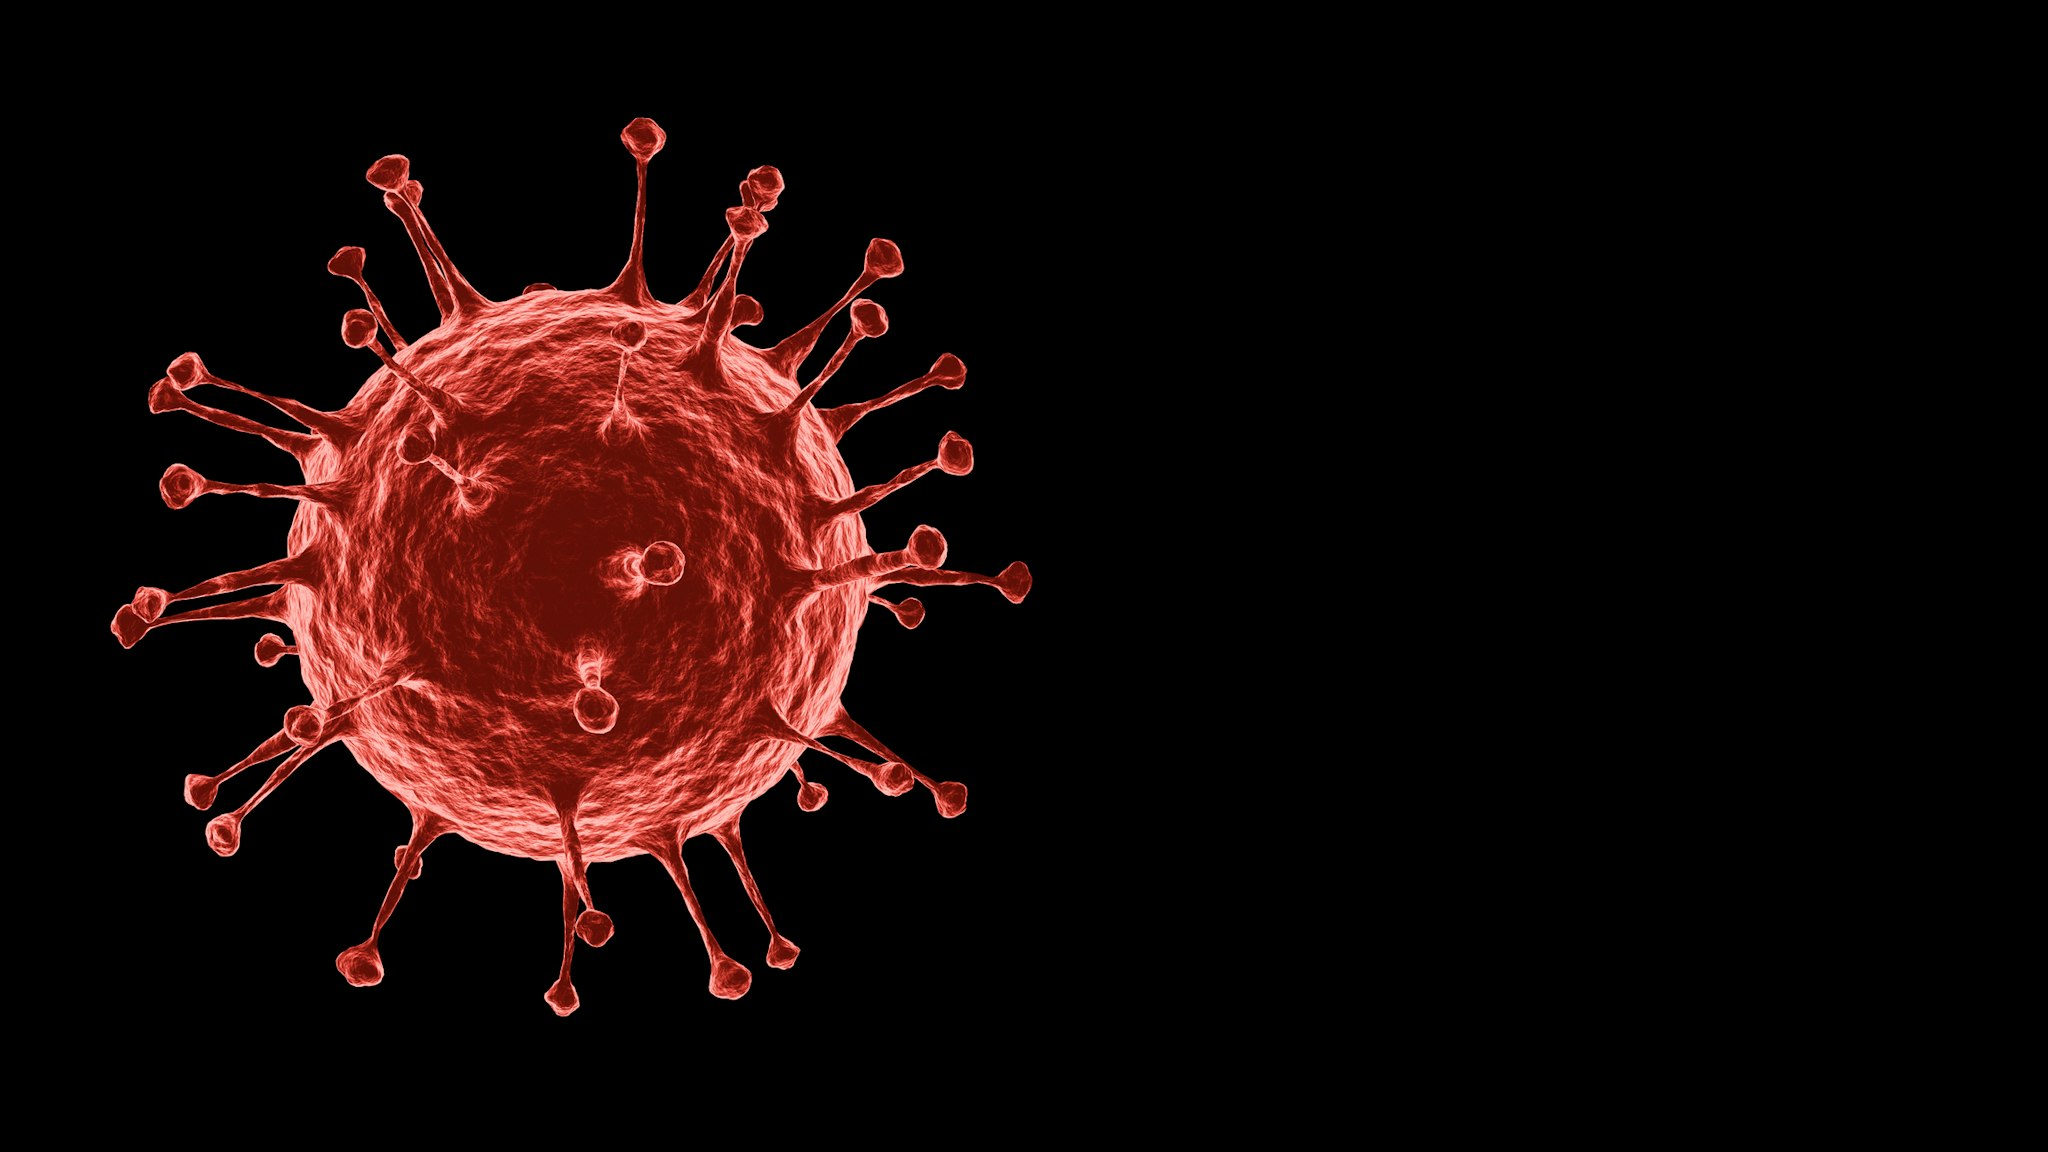 3D rendering Microscopic illustration of the spreading 2019 corona virus or Covid-19 that was discovered in Wuhan, infection of viruses, pandemic, outbreak and epidemic of disease